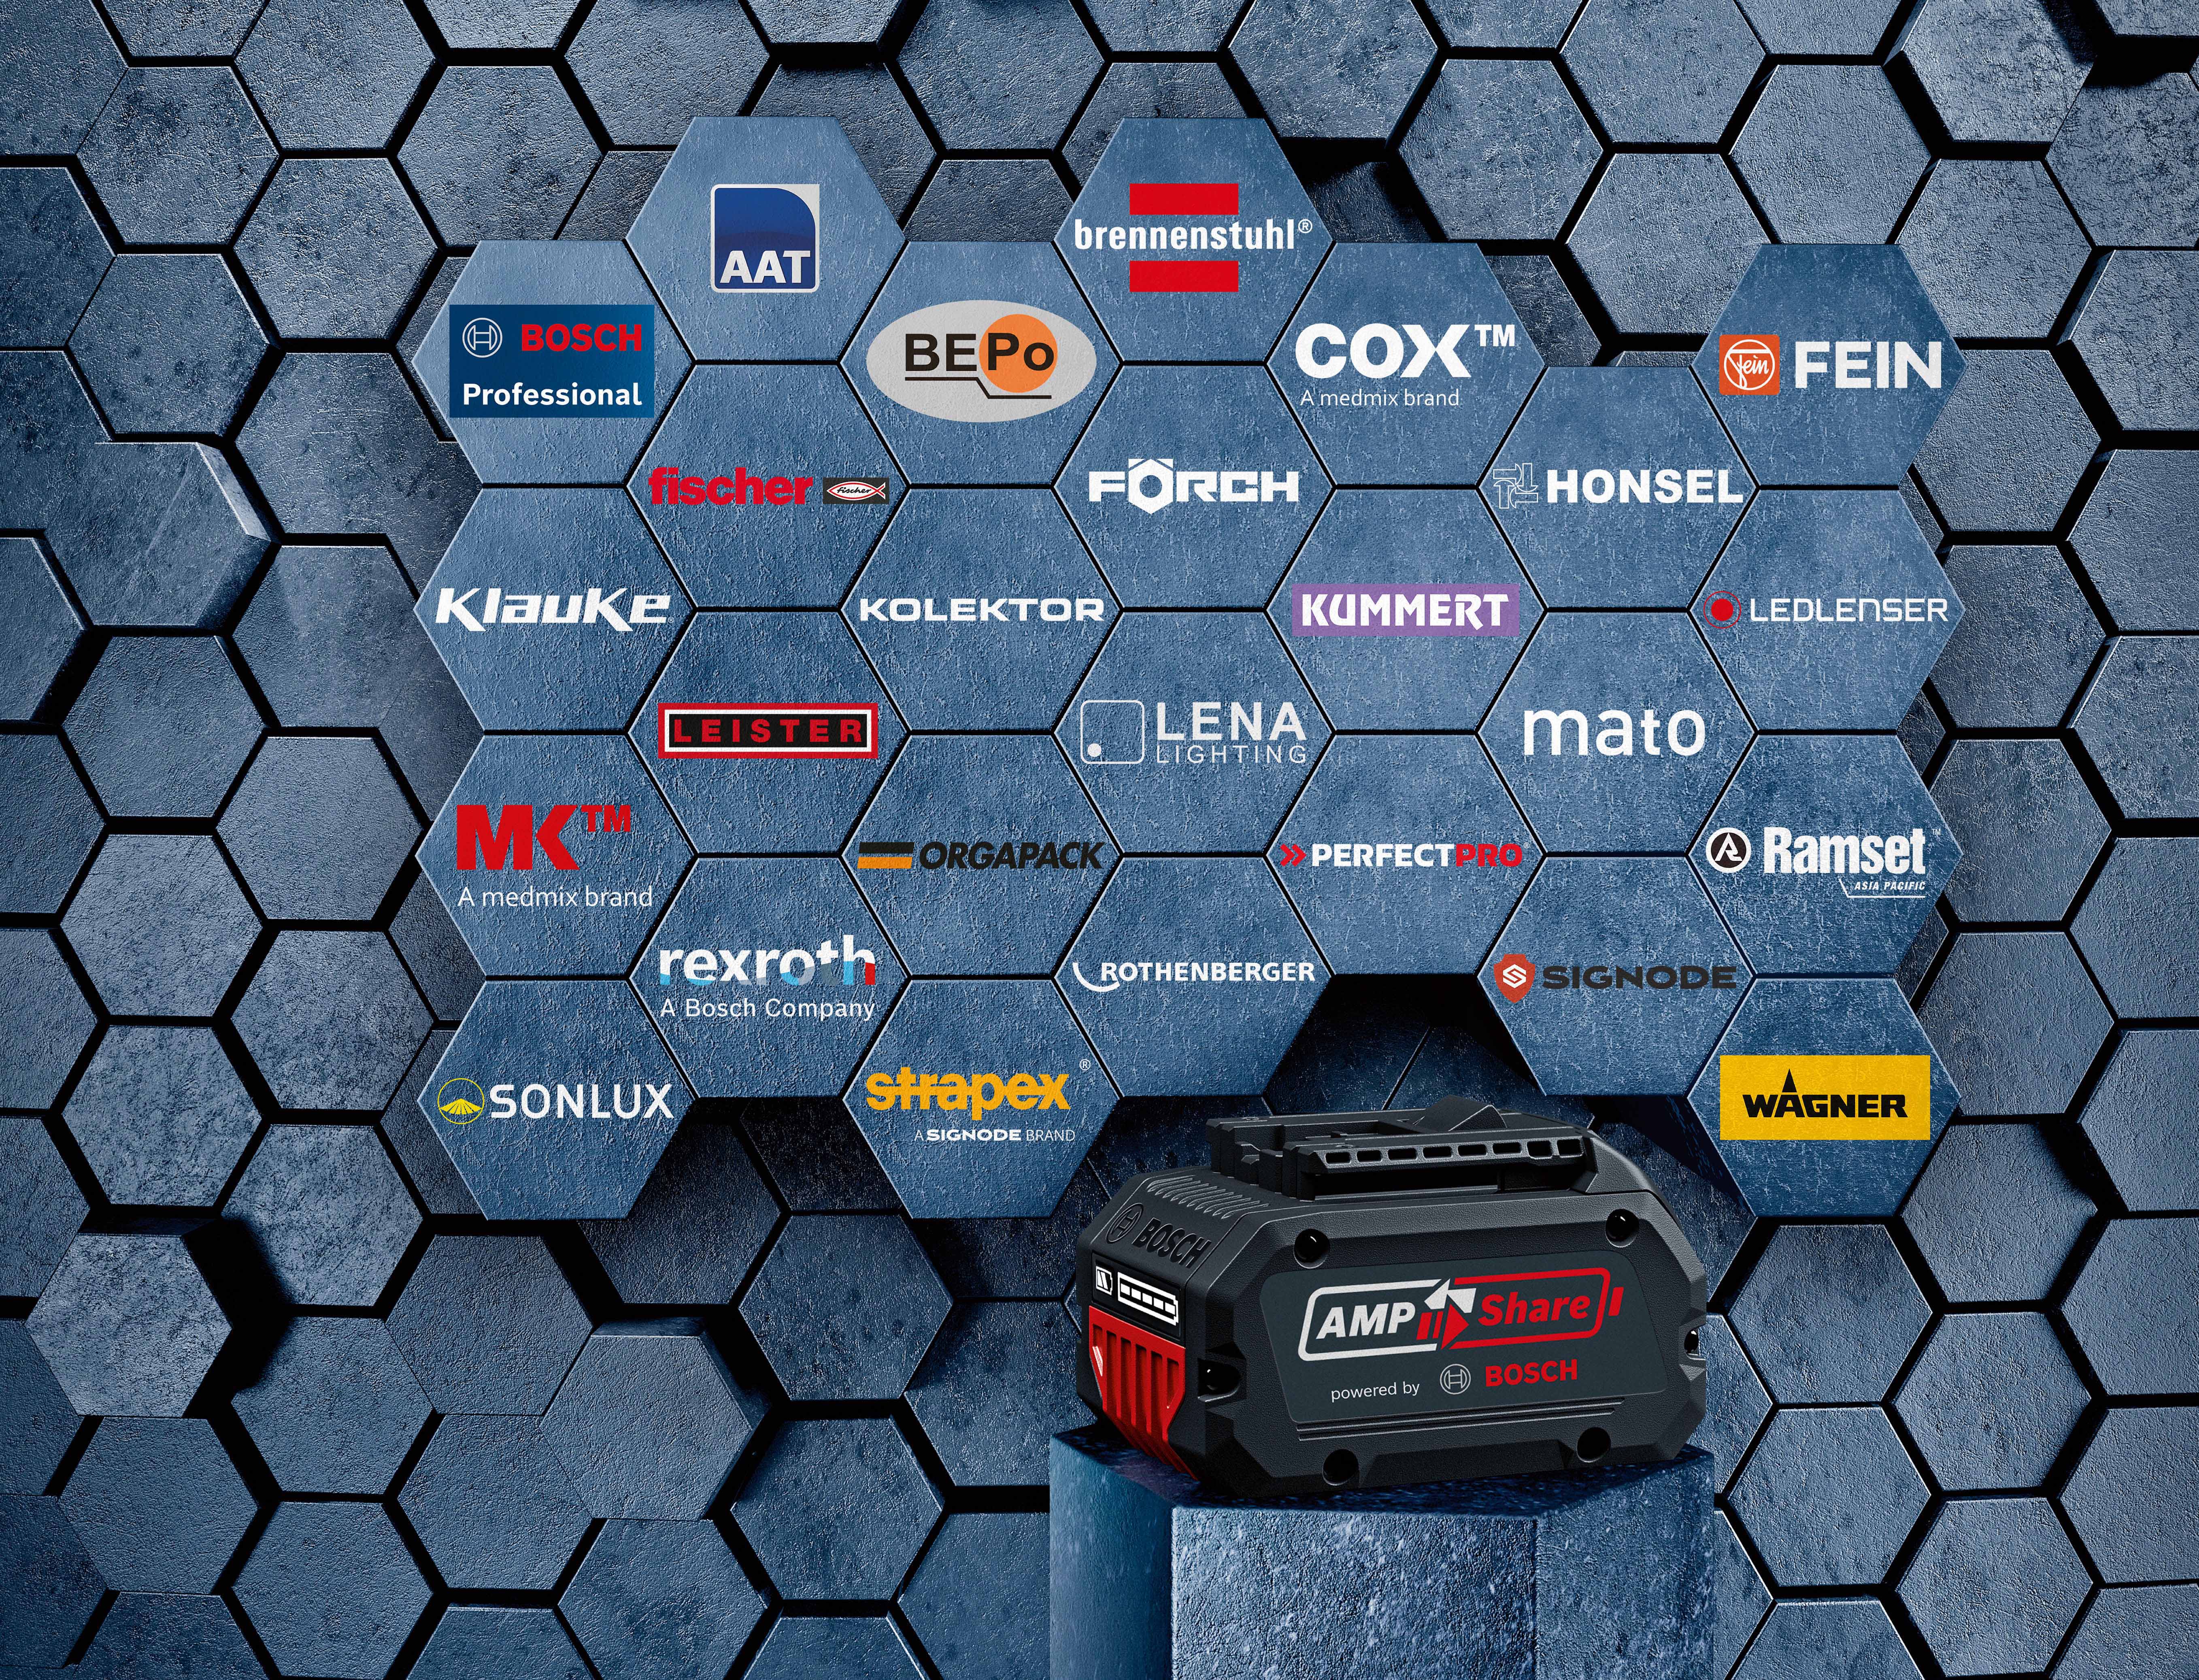 Battery system for pros expands to more than 25 brands: AmpShare – powered by Bosch